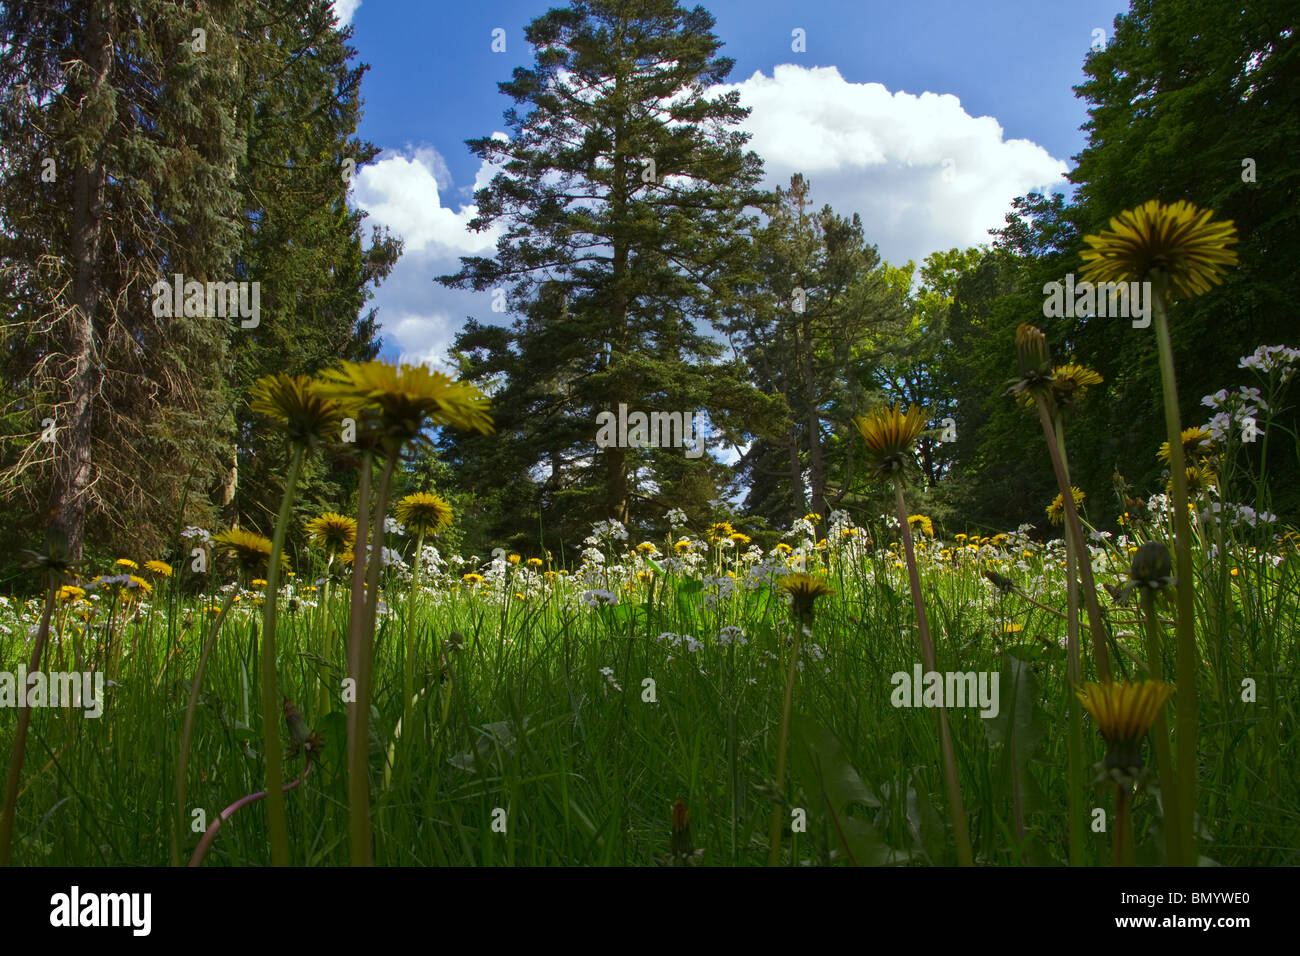 forest floor covered with dandelions against pine trees and a blue sky. Horizontal Stock Photo